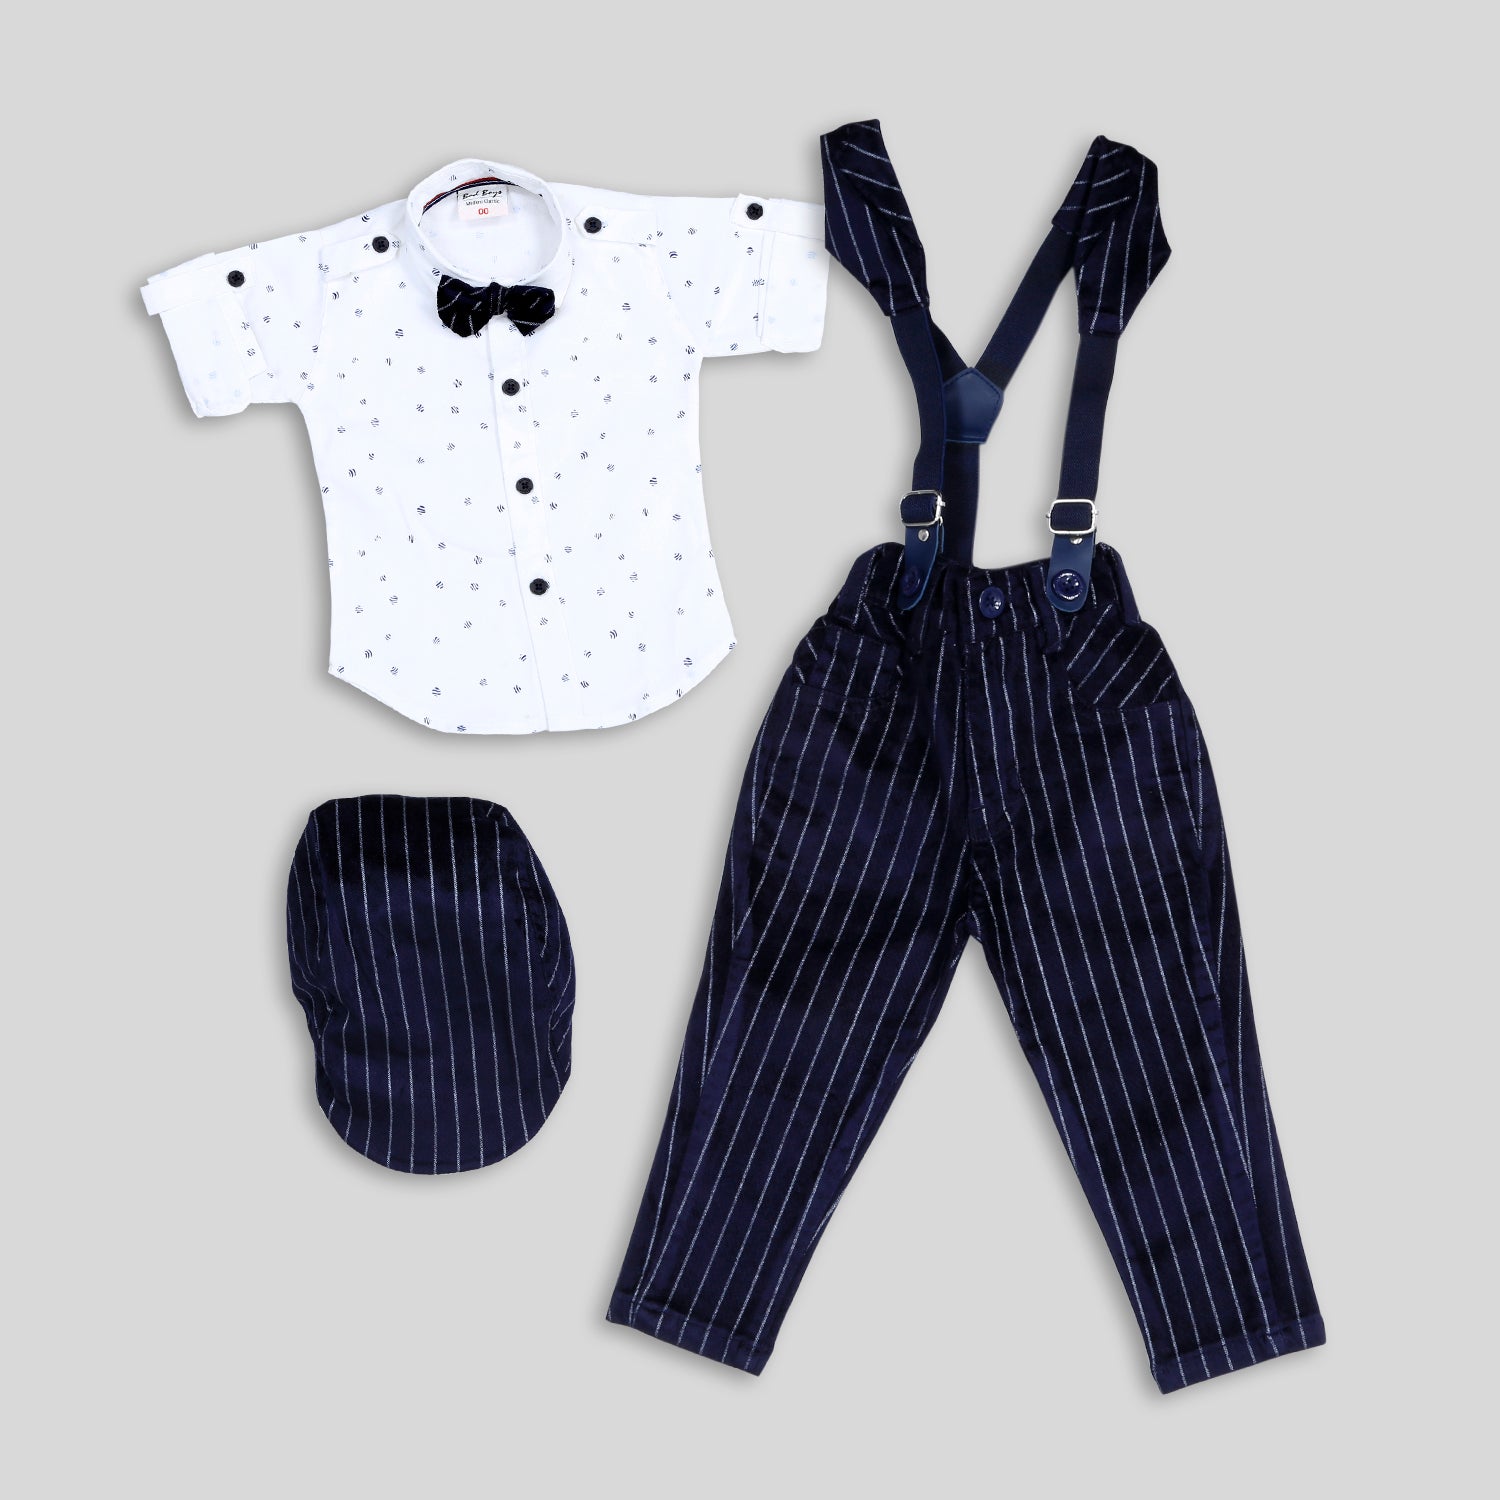 Baby Boys Clothes, Dress Shirt with Bowtie + Suspender Pants, 3 Months - 9  Years - Walmart.com